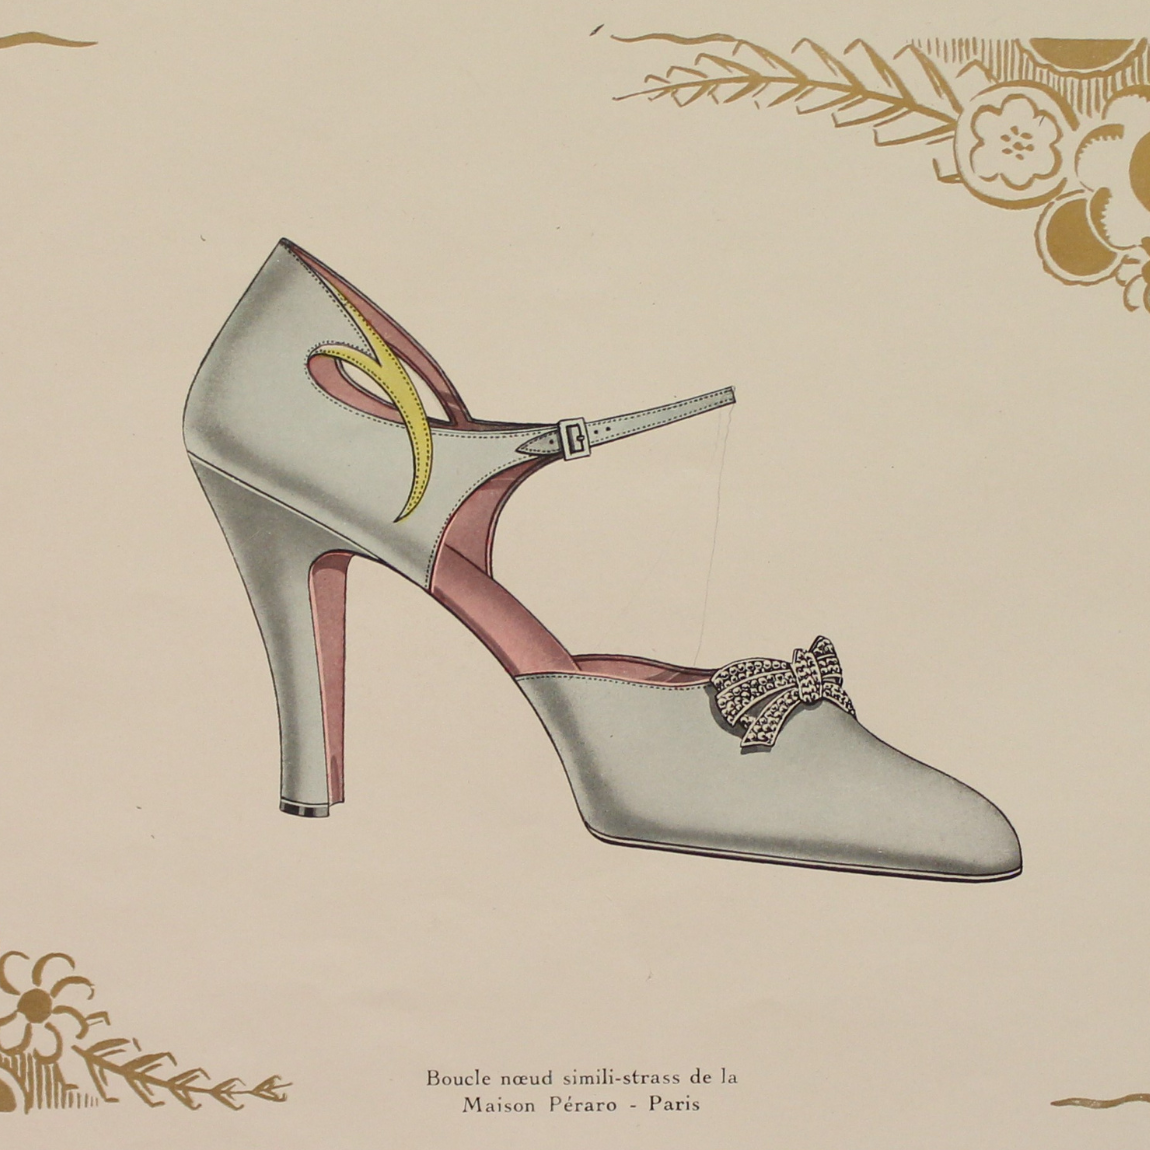 Sailing to 70's: A journey through the history of shoe fashion